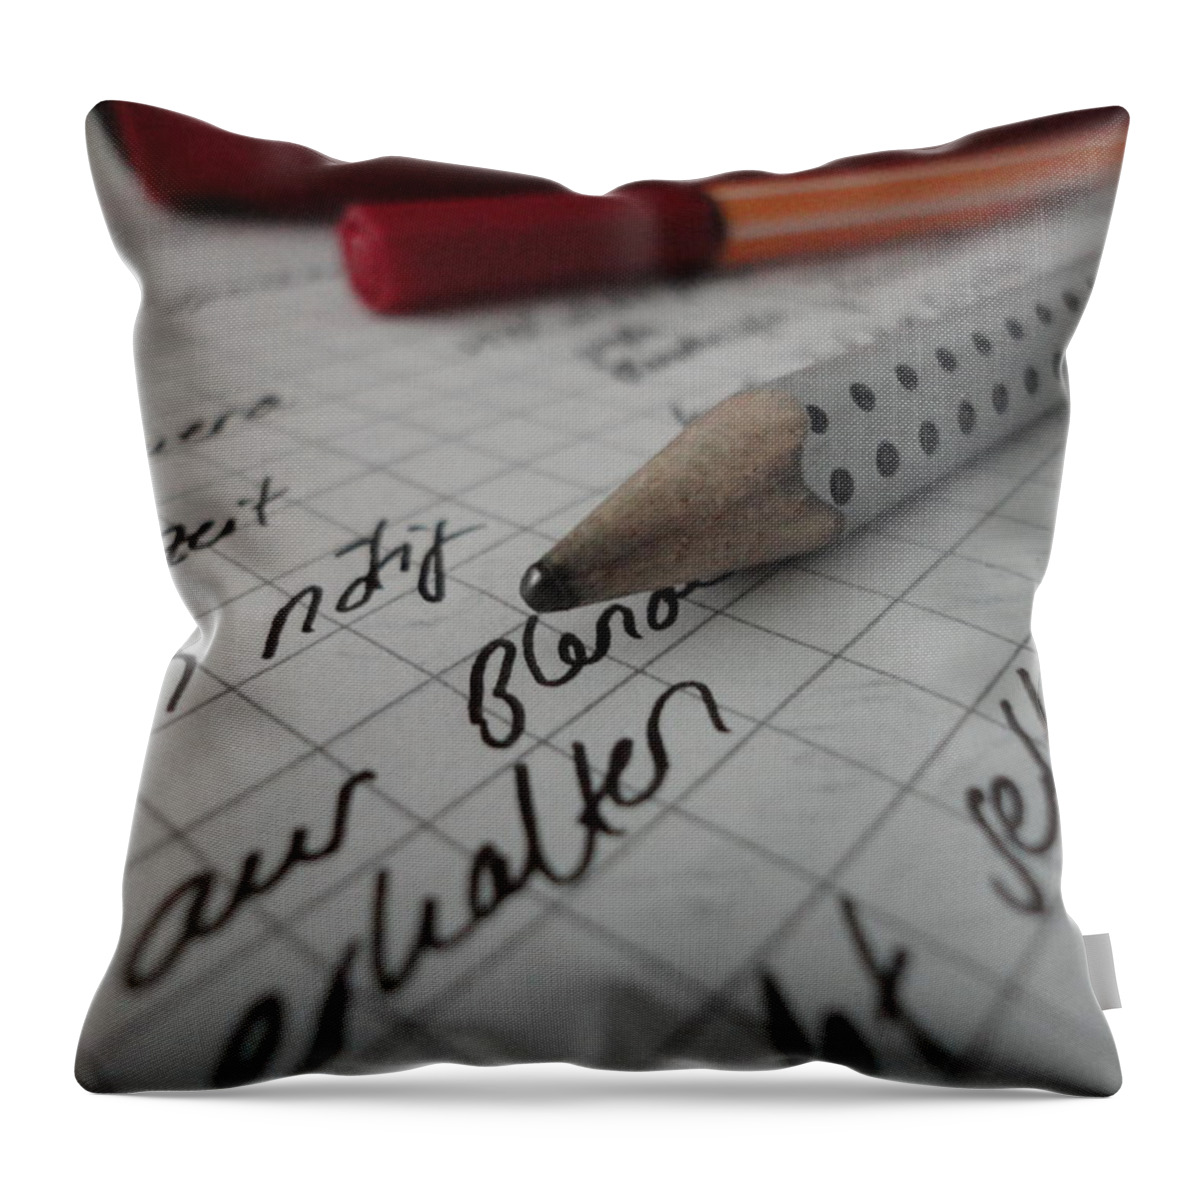 Pencil Throw Pillow featuring the photograph Handwritten by Sabina Wagner